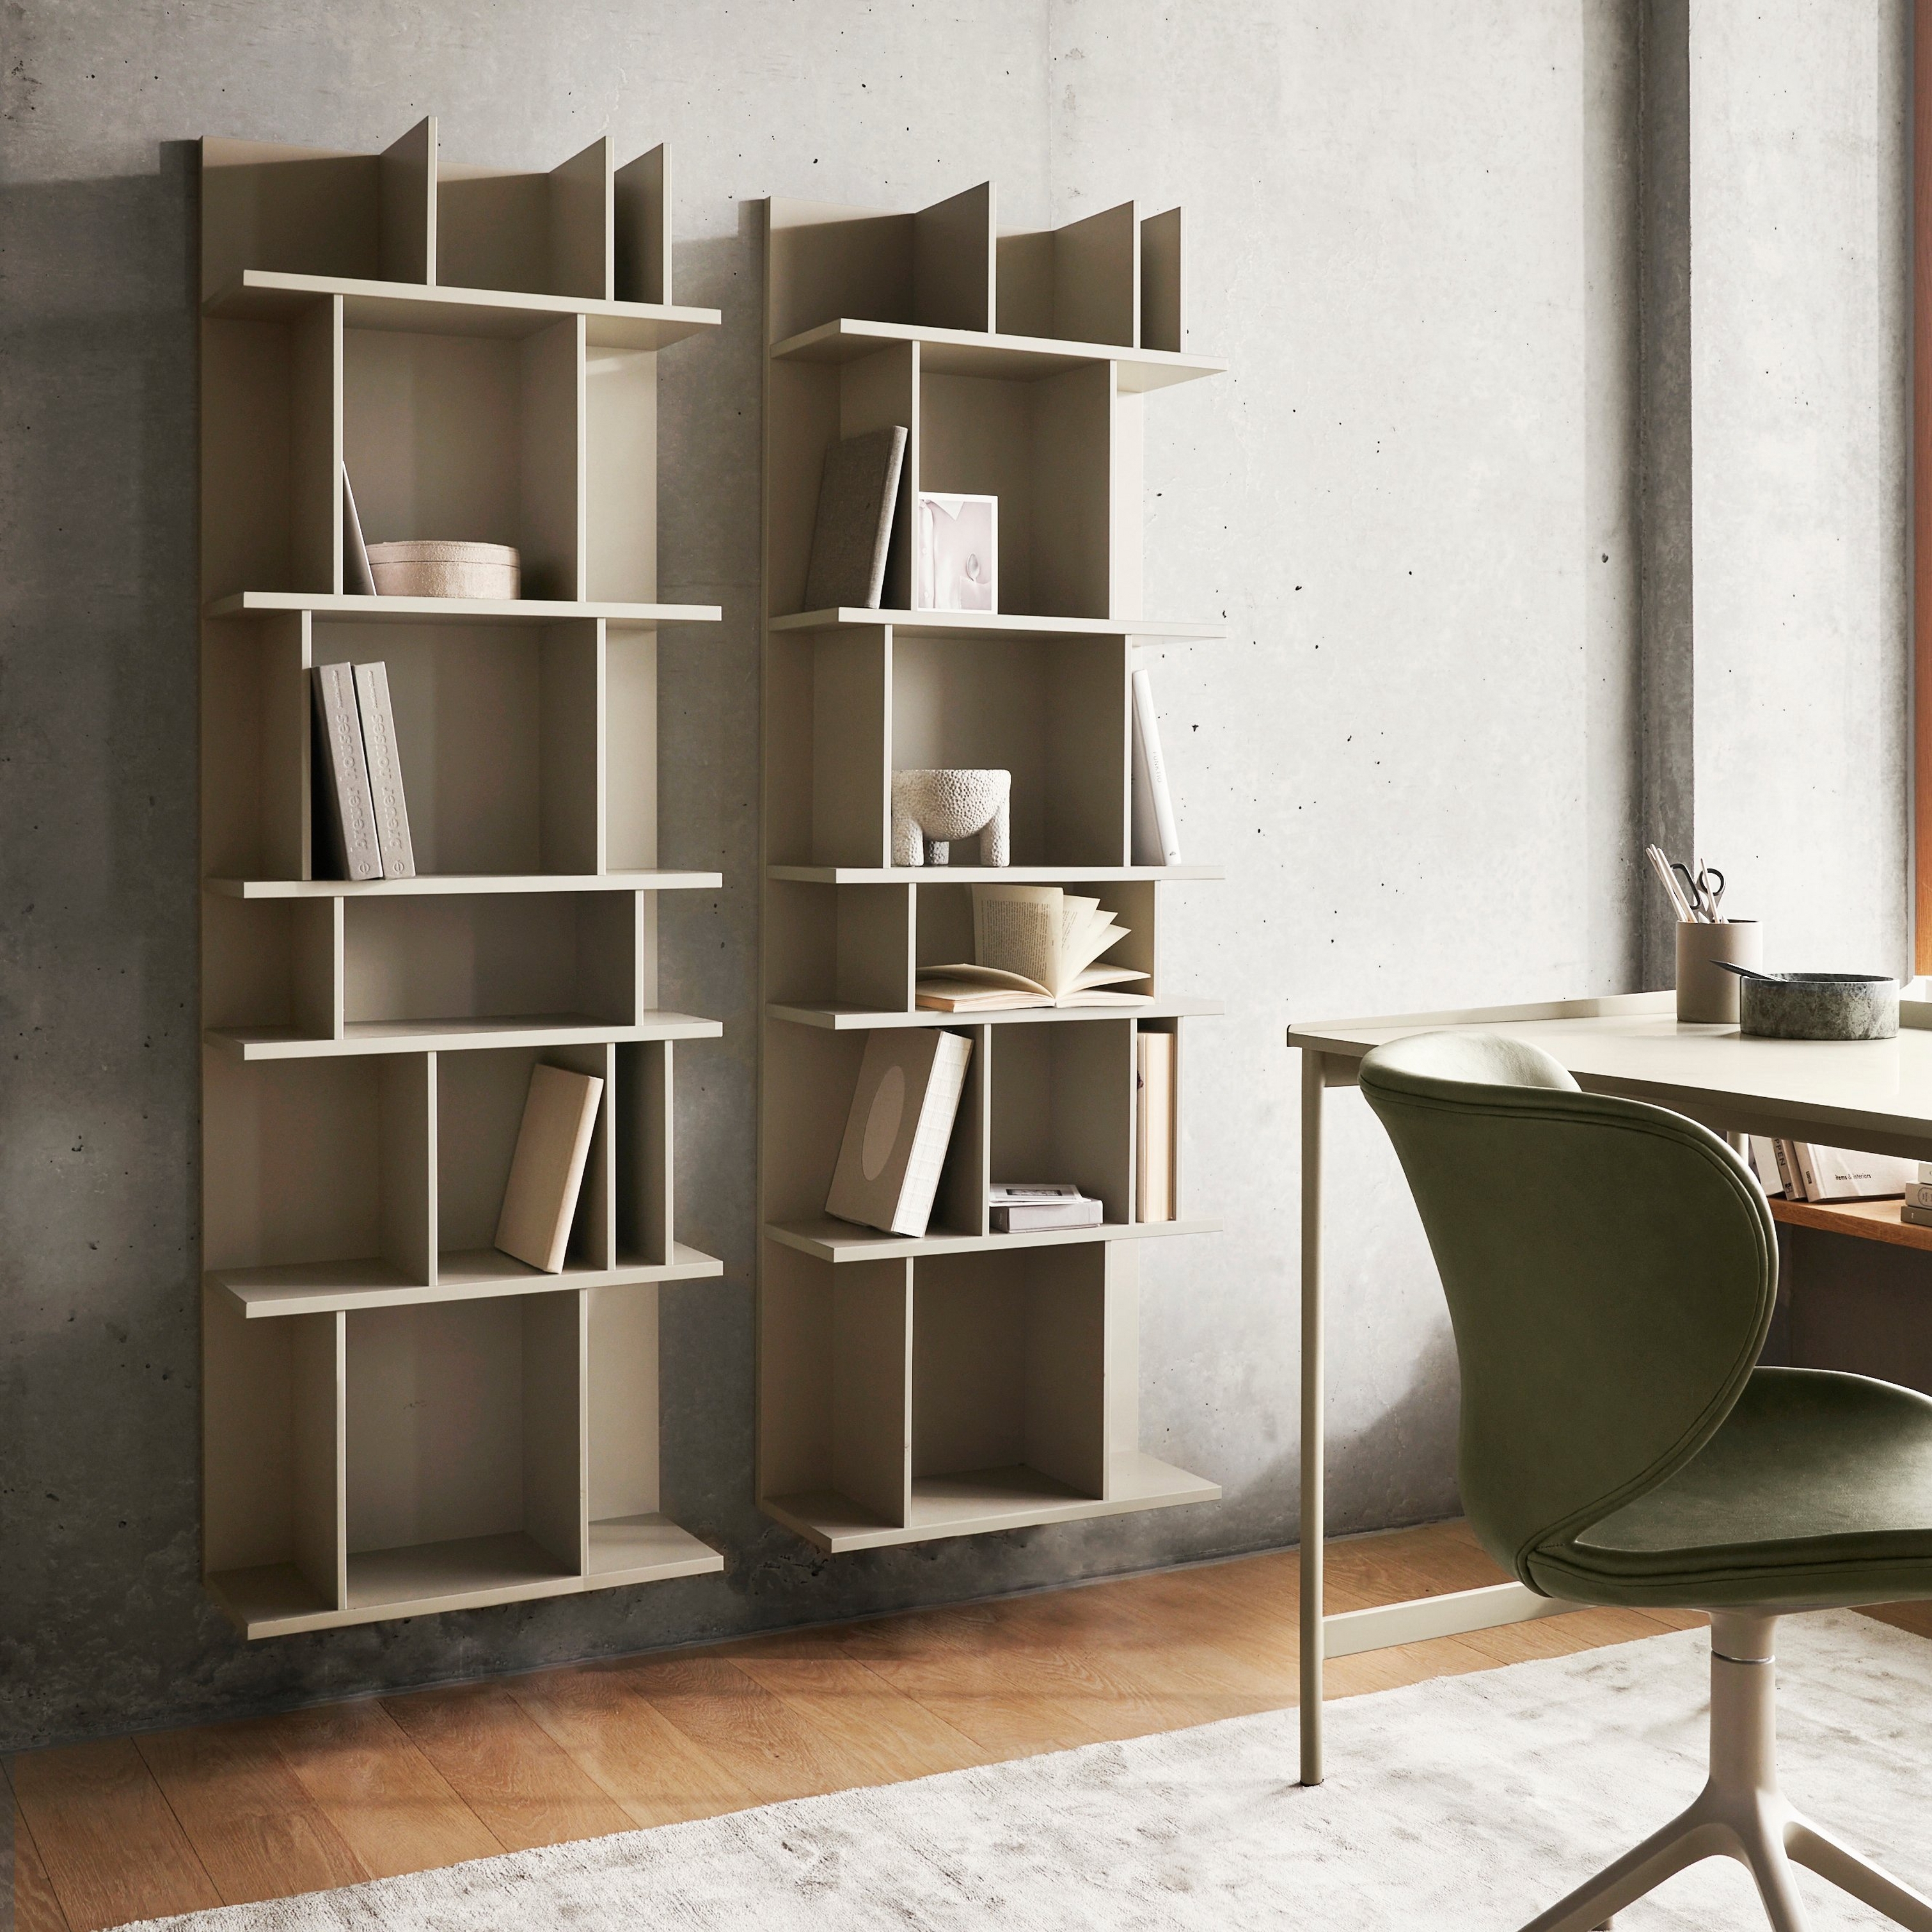 Asymmetrical wooden shelves with books, next to a desk and chair in a room with concrete walls.